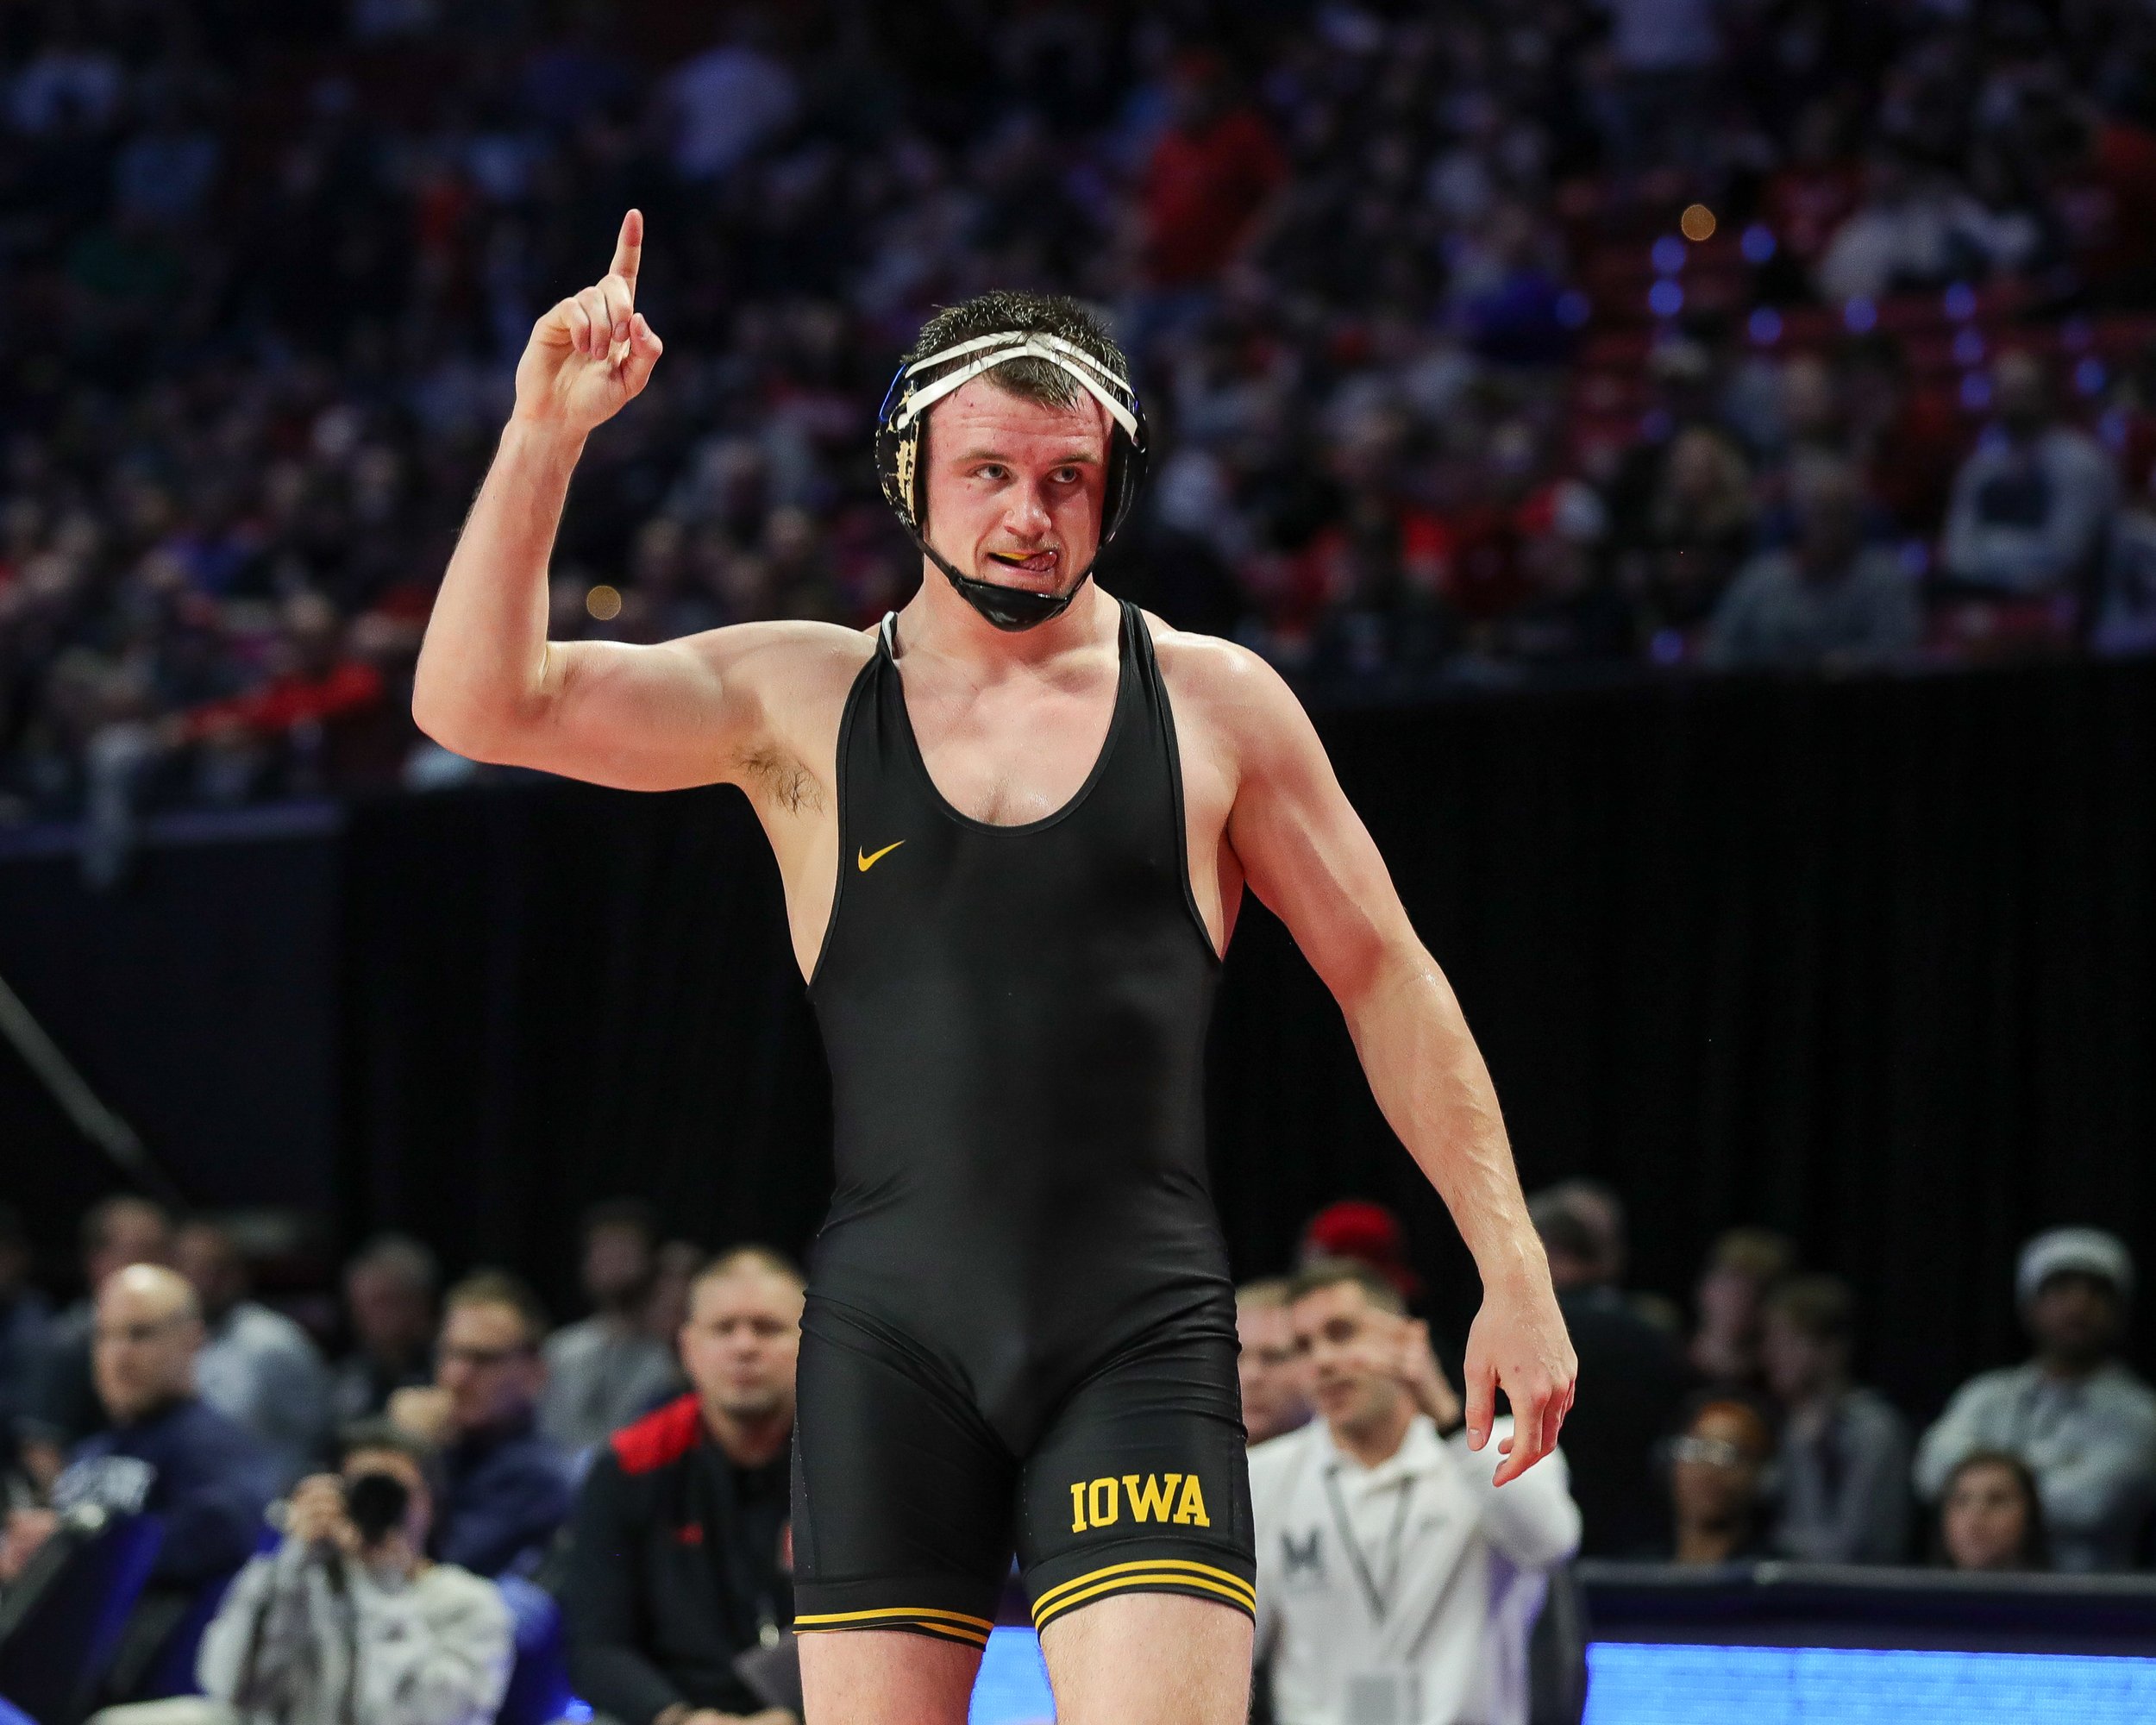  Iowa wrestler Zach Glazier celebrates defeating Maryland’s Jax Smith in a 197-lb semifinal match during the Big Ten Wrestling Championships at the Xfinity Center in College Park, Maryland on Saturday, March 9, 2023. Glazier won 4-1 in SV1. (David Ha